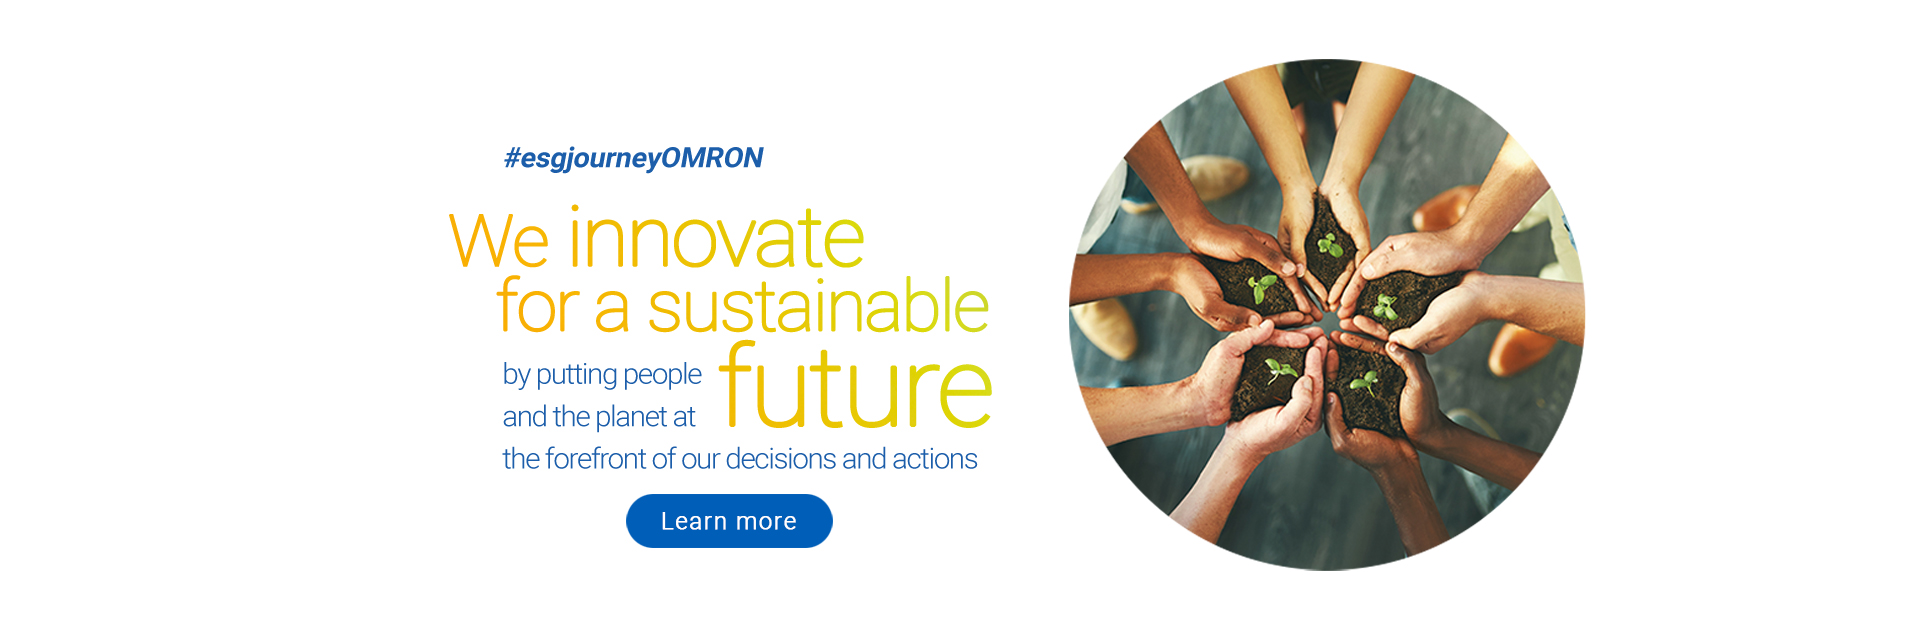 At OMRON, we innovate for a sustainable future by puttint people and the planet at the forefront of our decisions and actions. Learn more